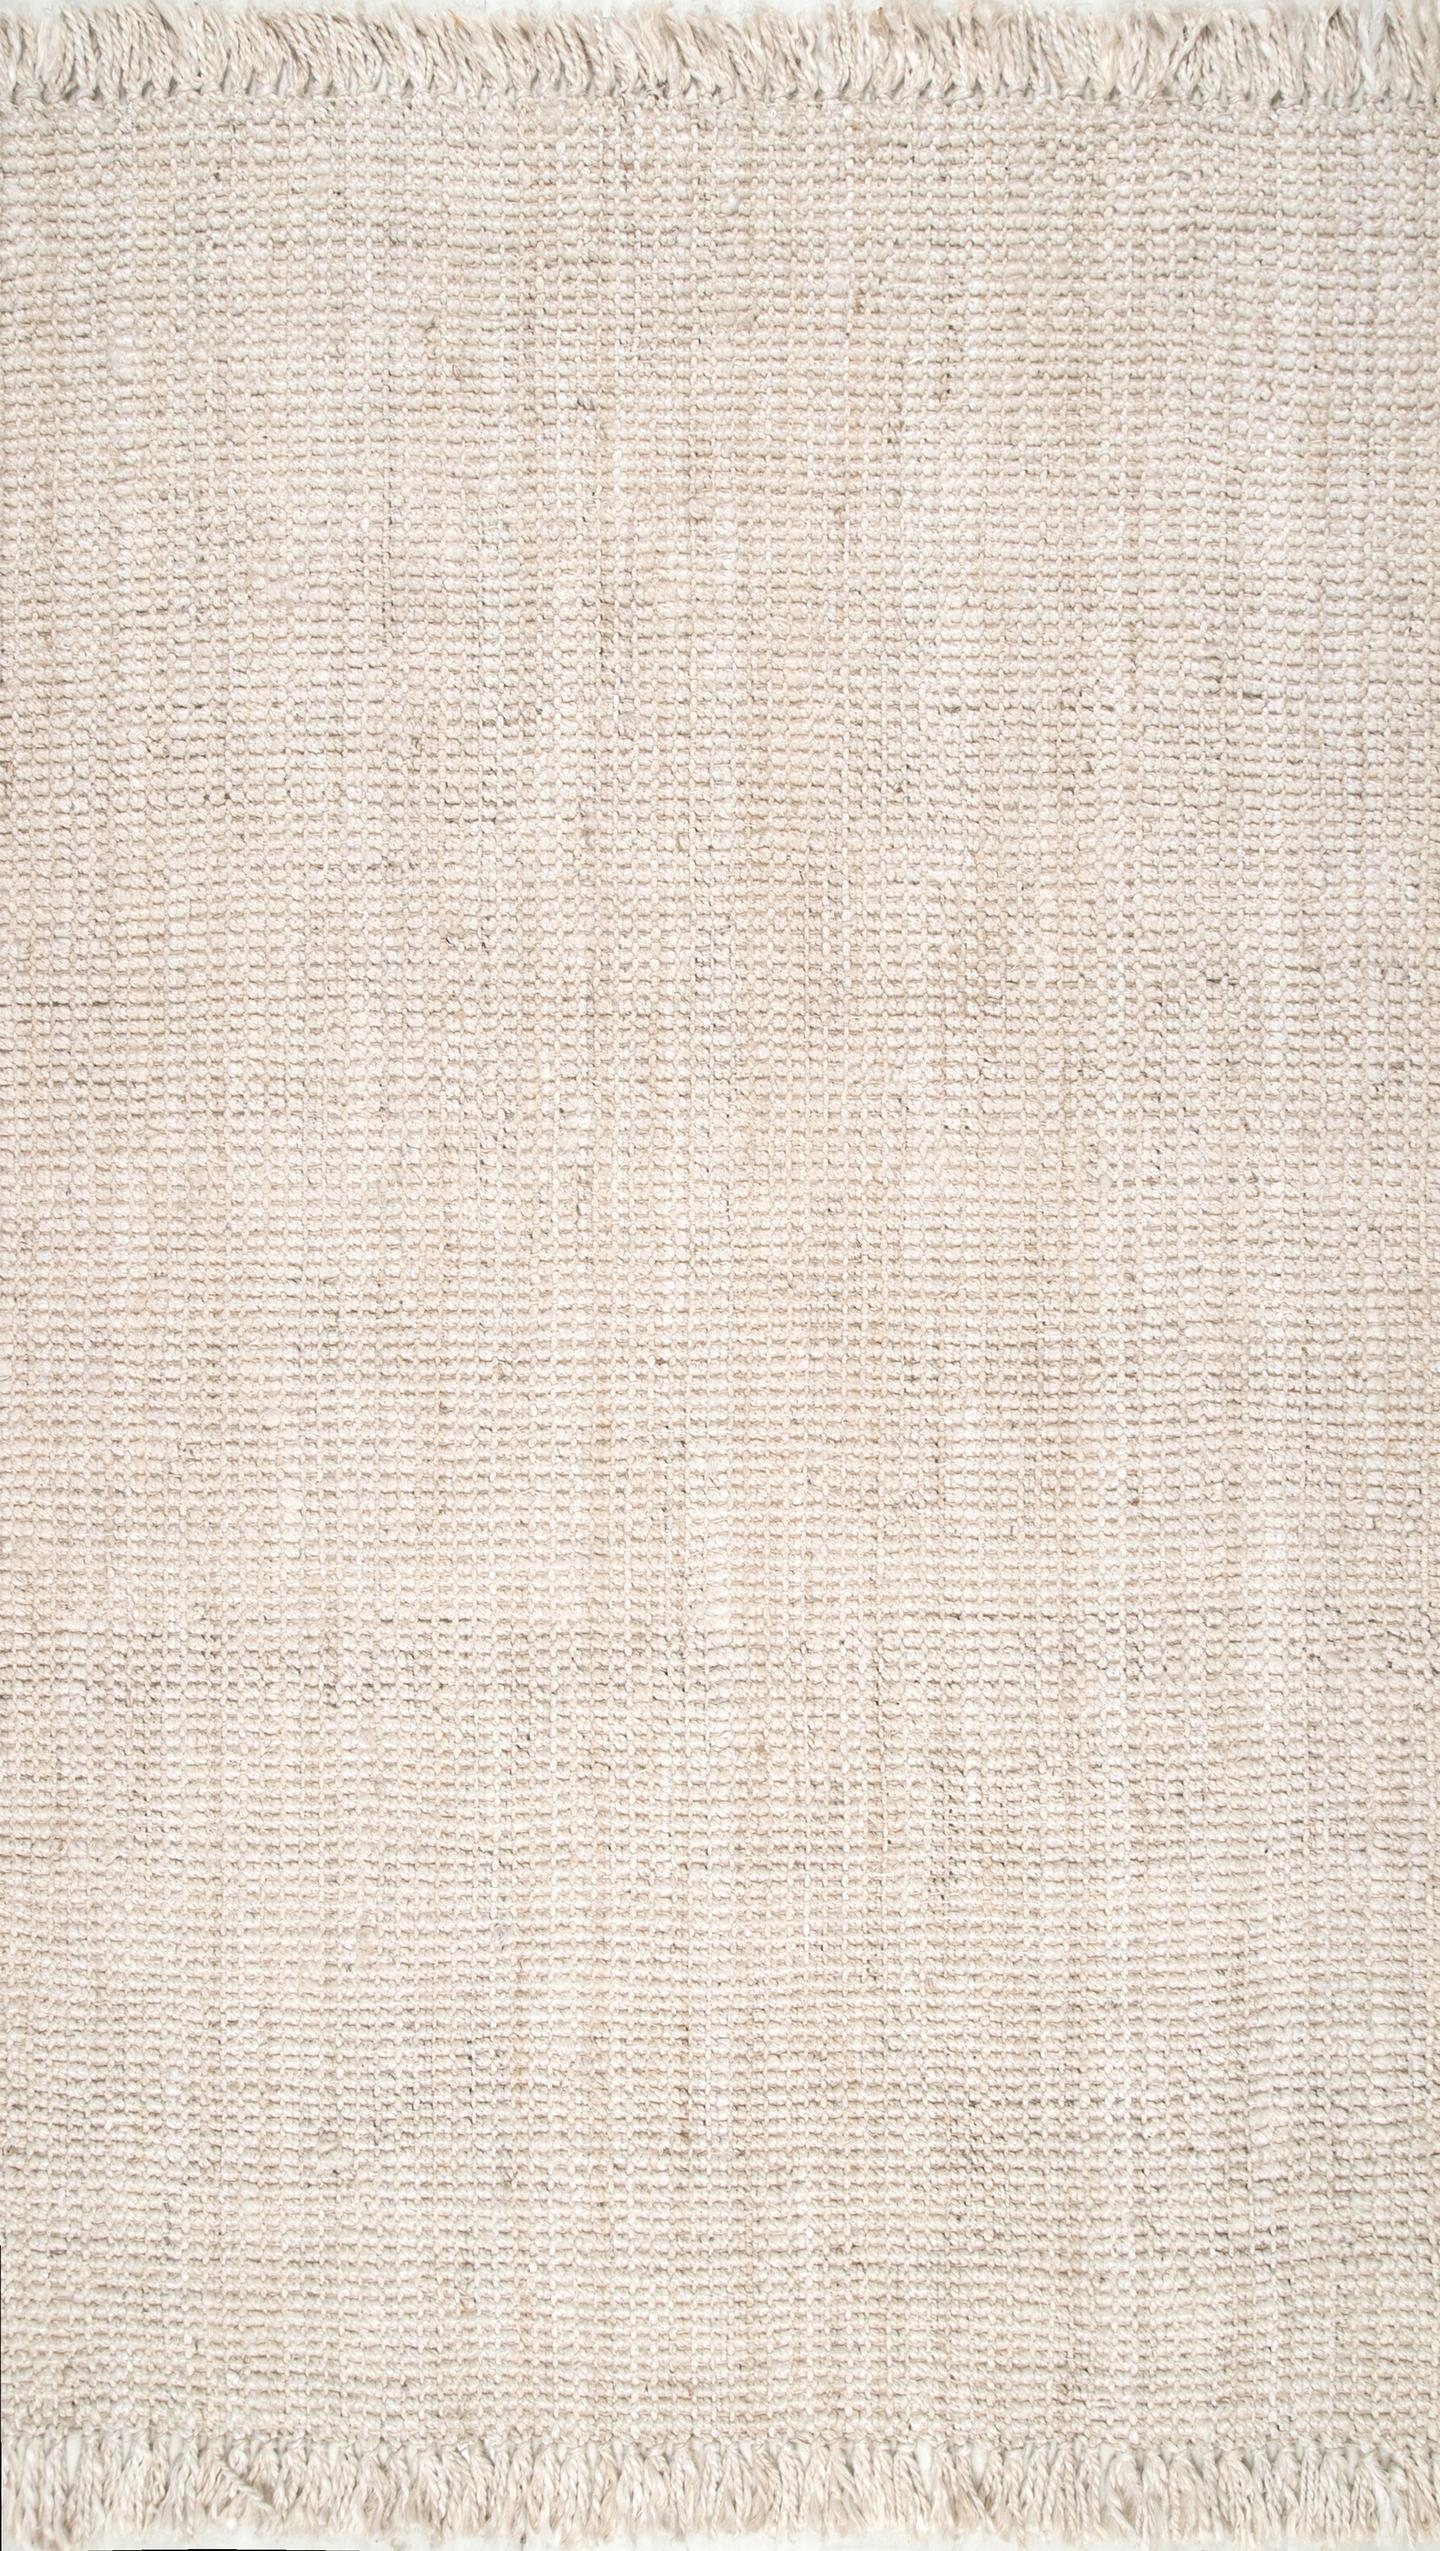 Hand Woven Chunky Loop Jute Area Rug, 9'6" x 11'6", Off White - Image 0